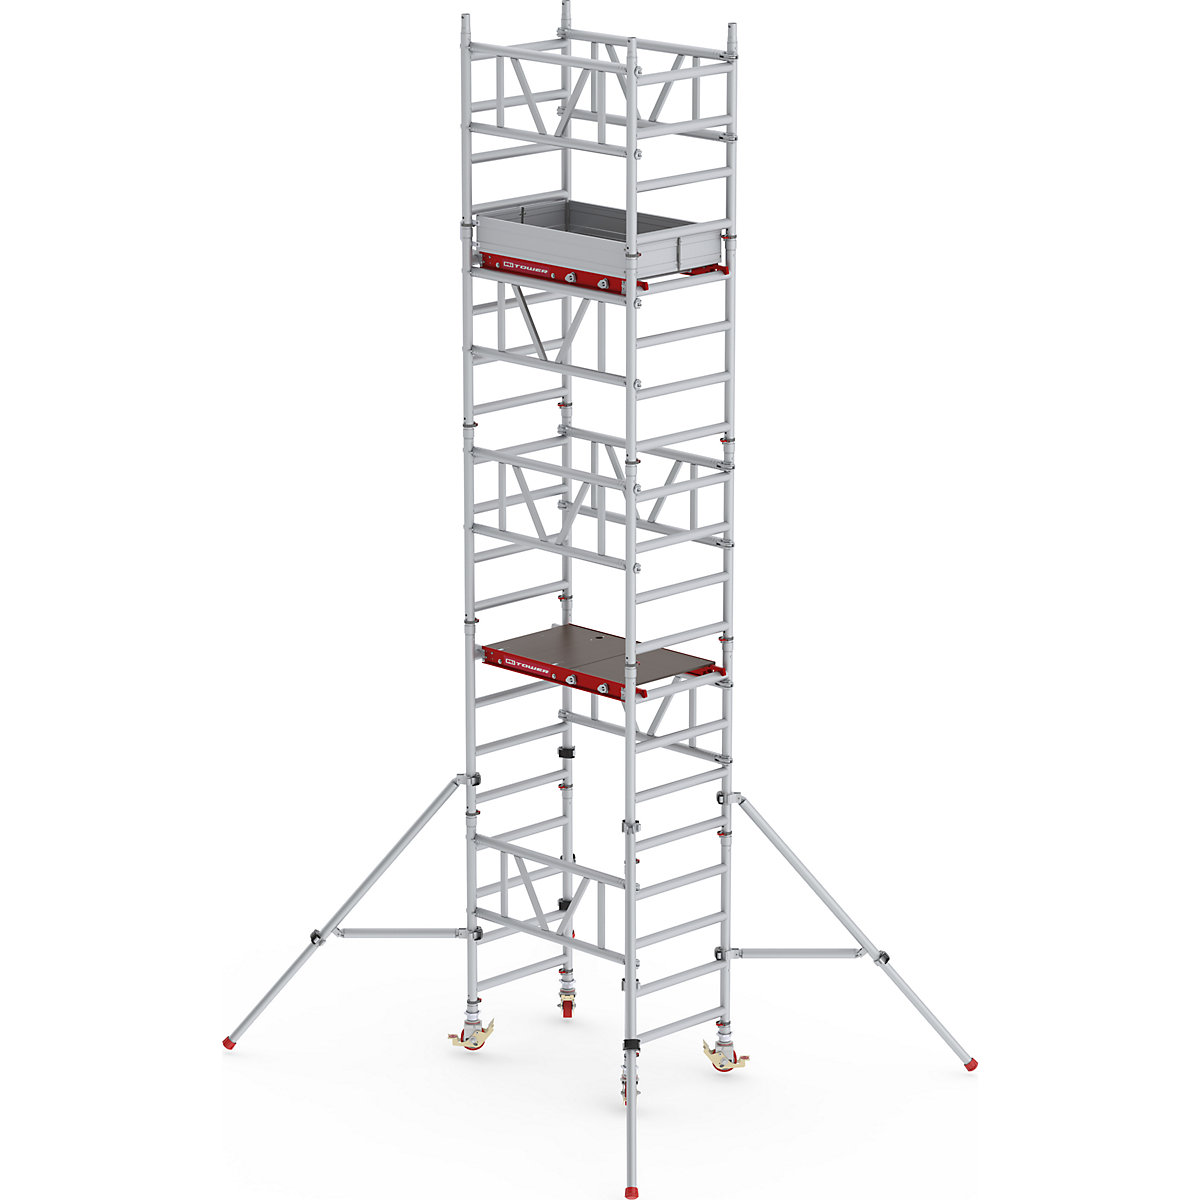 Standard MiTOWER quick assembly mobile access tower – Altrex, wooden platform, LxW 1200 x 750 mm, working height 6 m-24